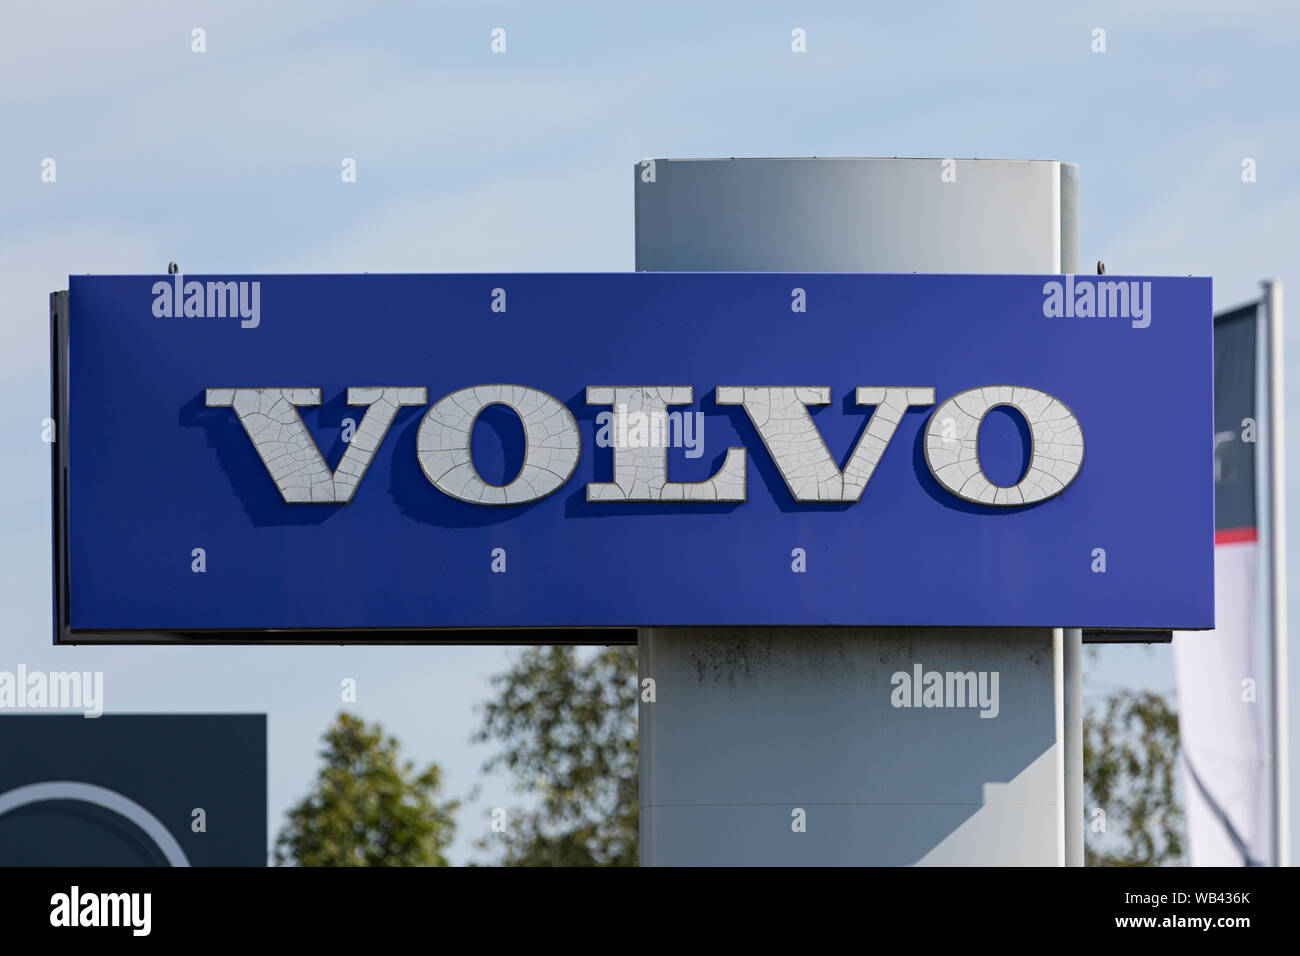 Stade, Germany - August 22, 2019: Signage on pole identifying a Volvo  cars dealership. Stock Photo